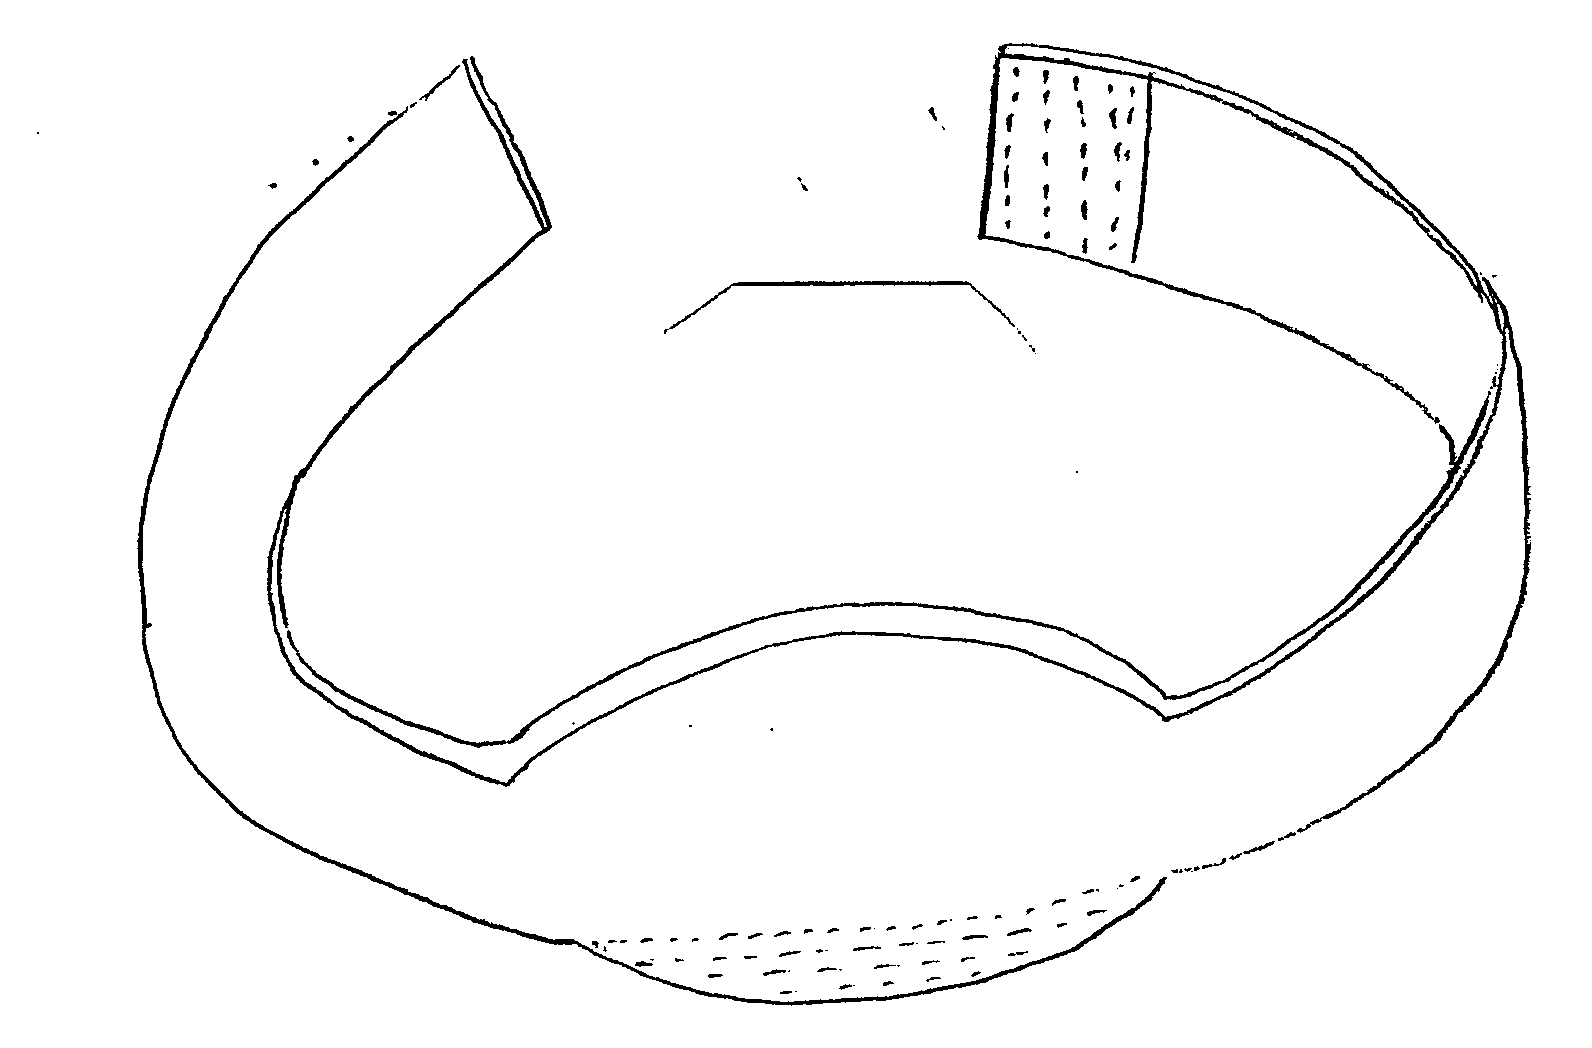 Infant stomach band to protect from injury